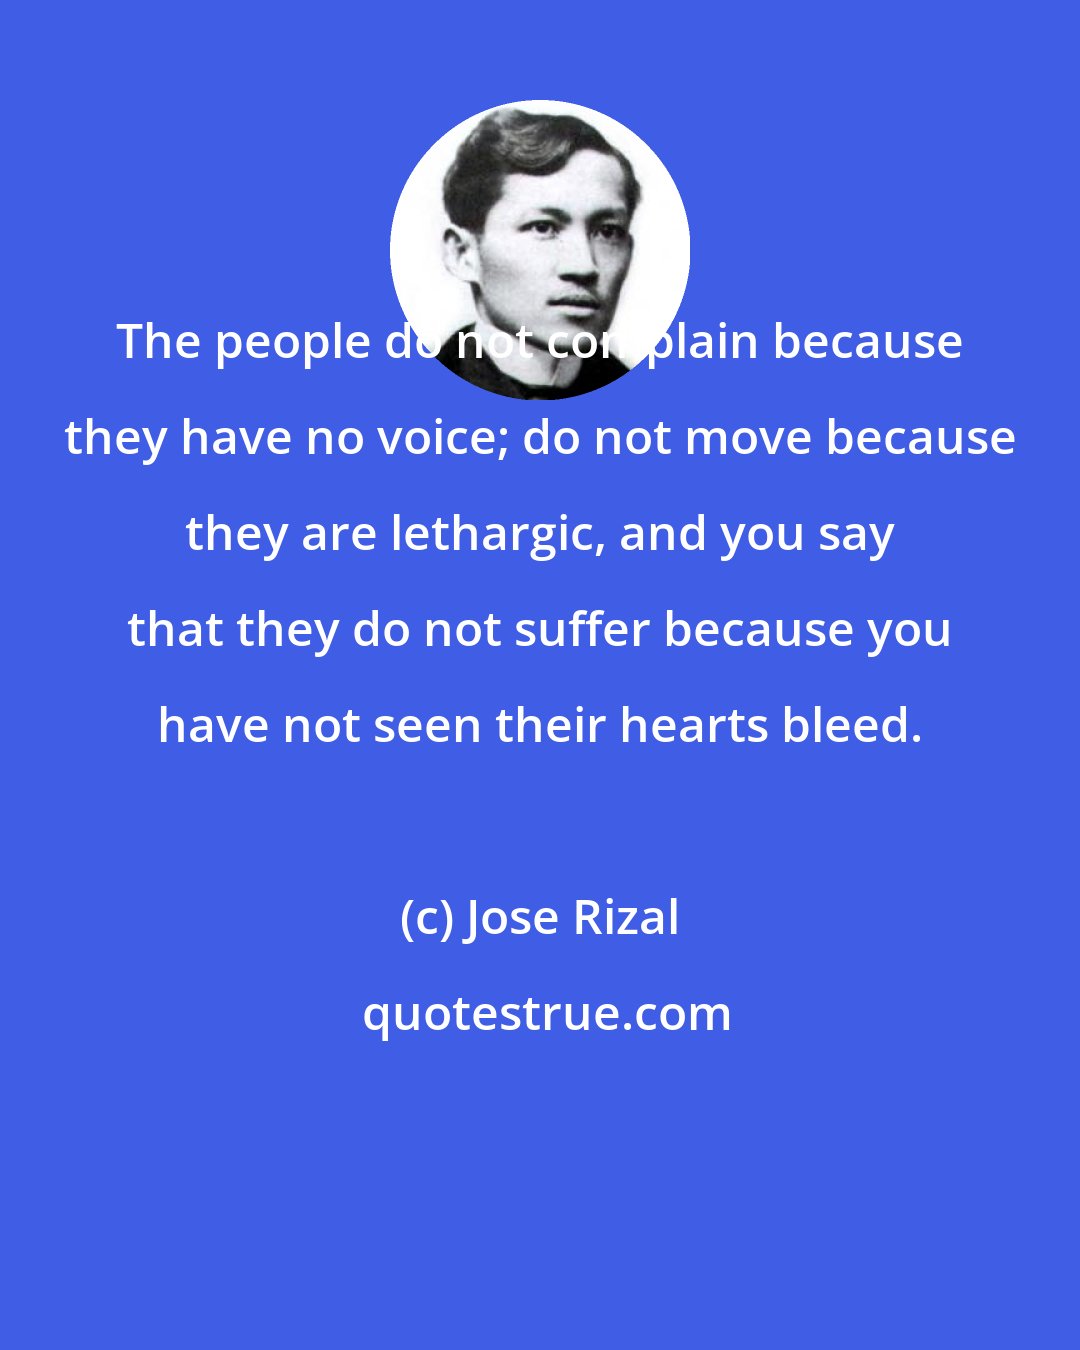 Jose Rizal: The people do not complain because they have no voice; do not move because they are lethargic, and you say that they do not suffer because you have not seen their hearts bleed.